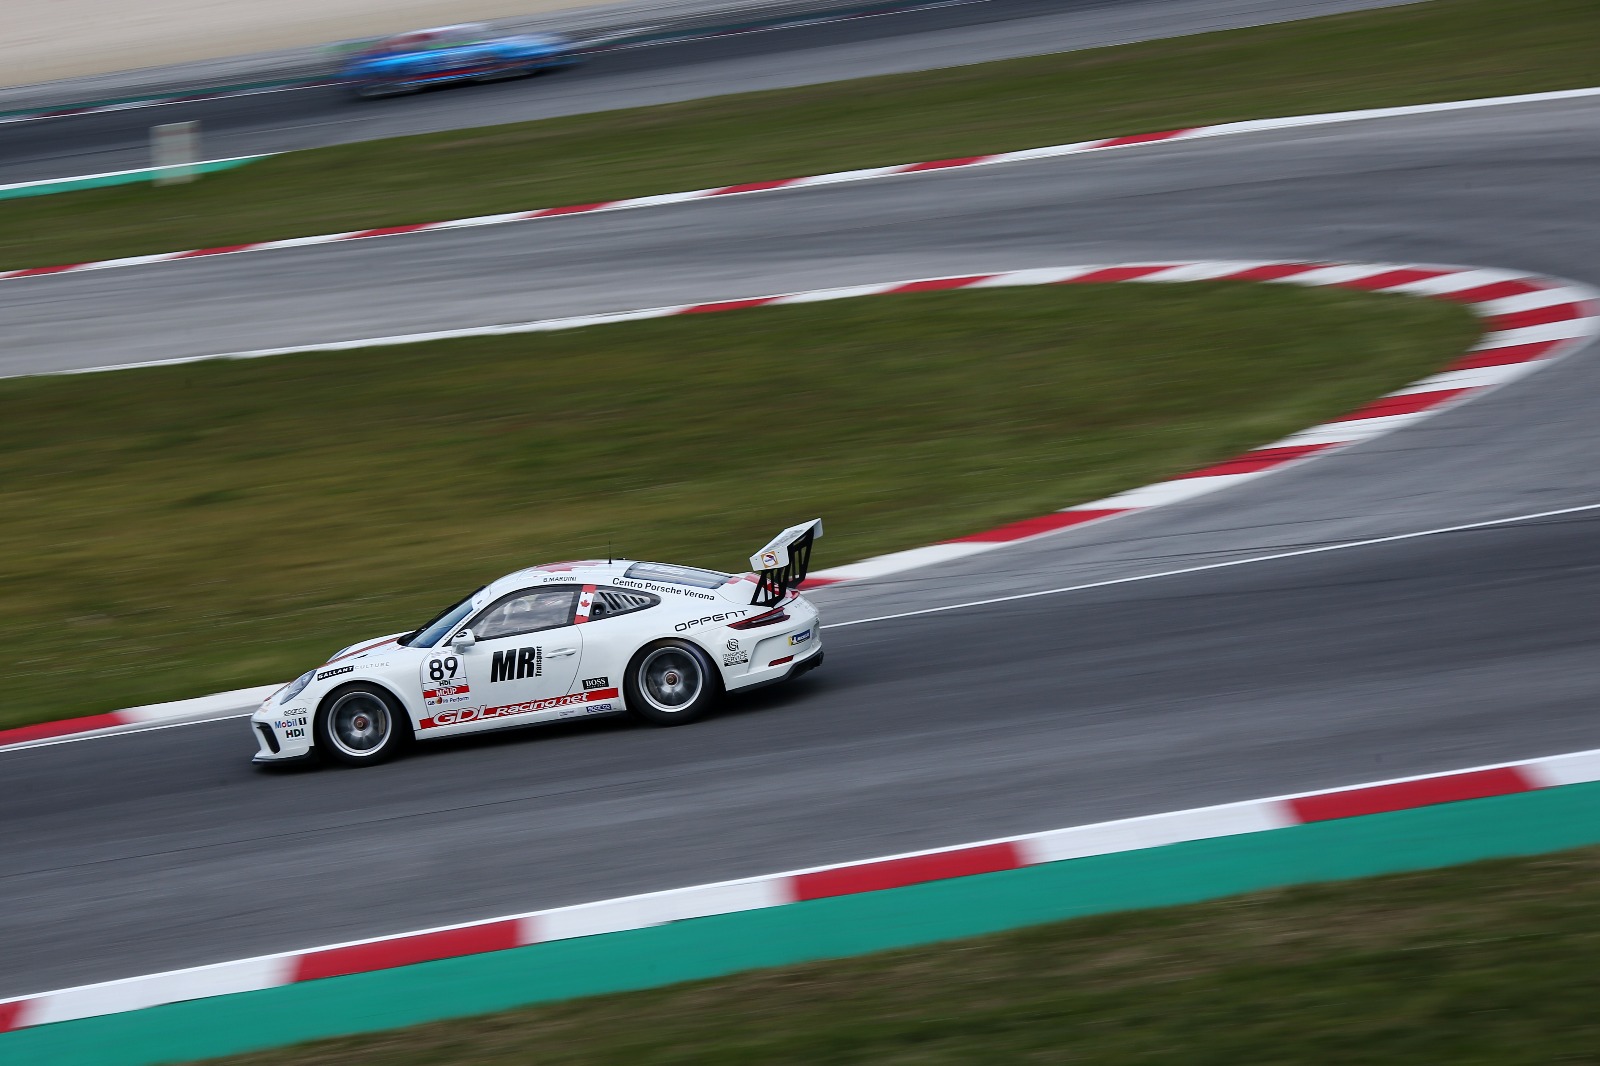 GDL Racing makes debut in the Porsche Cup Sport Suisse fielding a car for Mario Cordoni